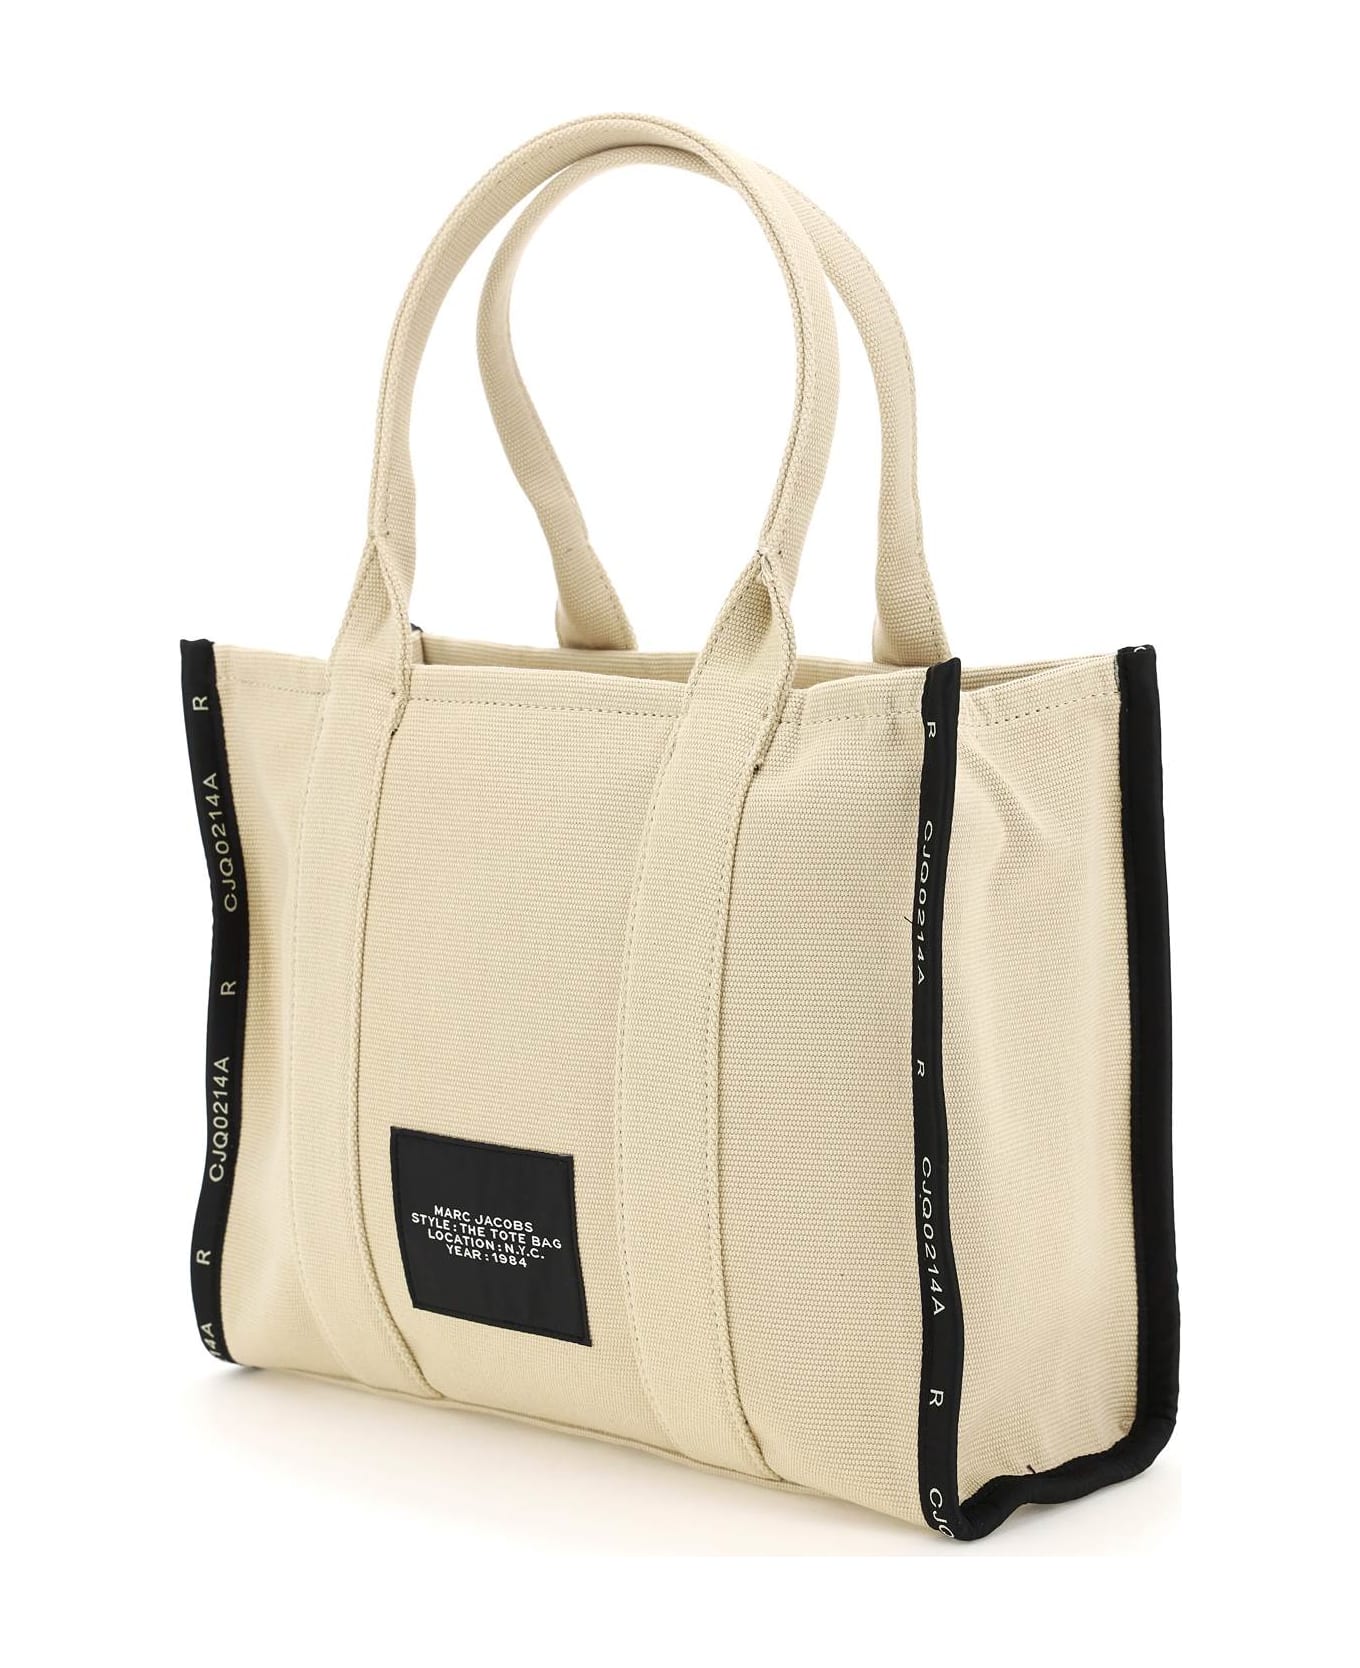 Marc Jacobs Traveler Tote Bag - Brown トートバッグ